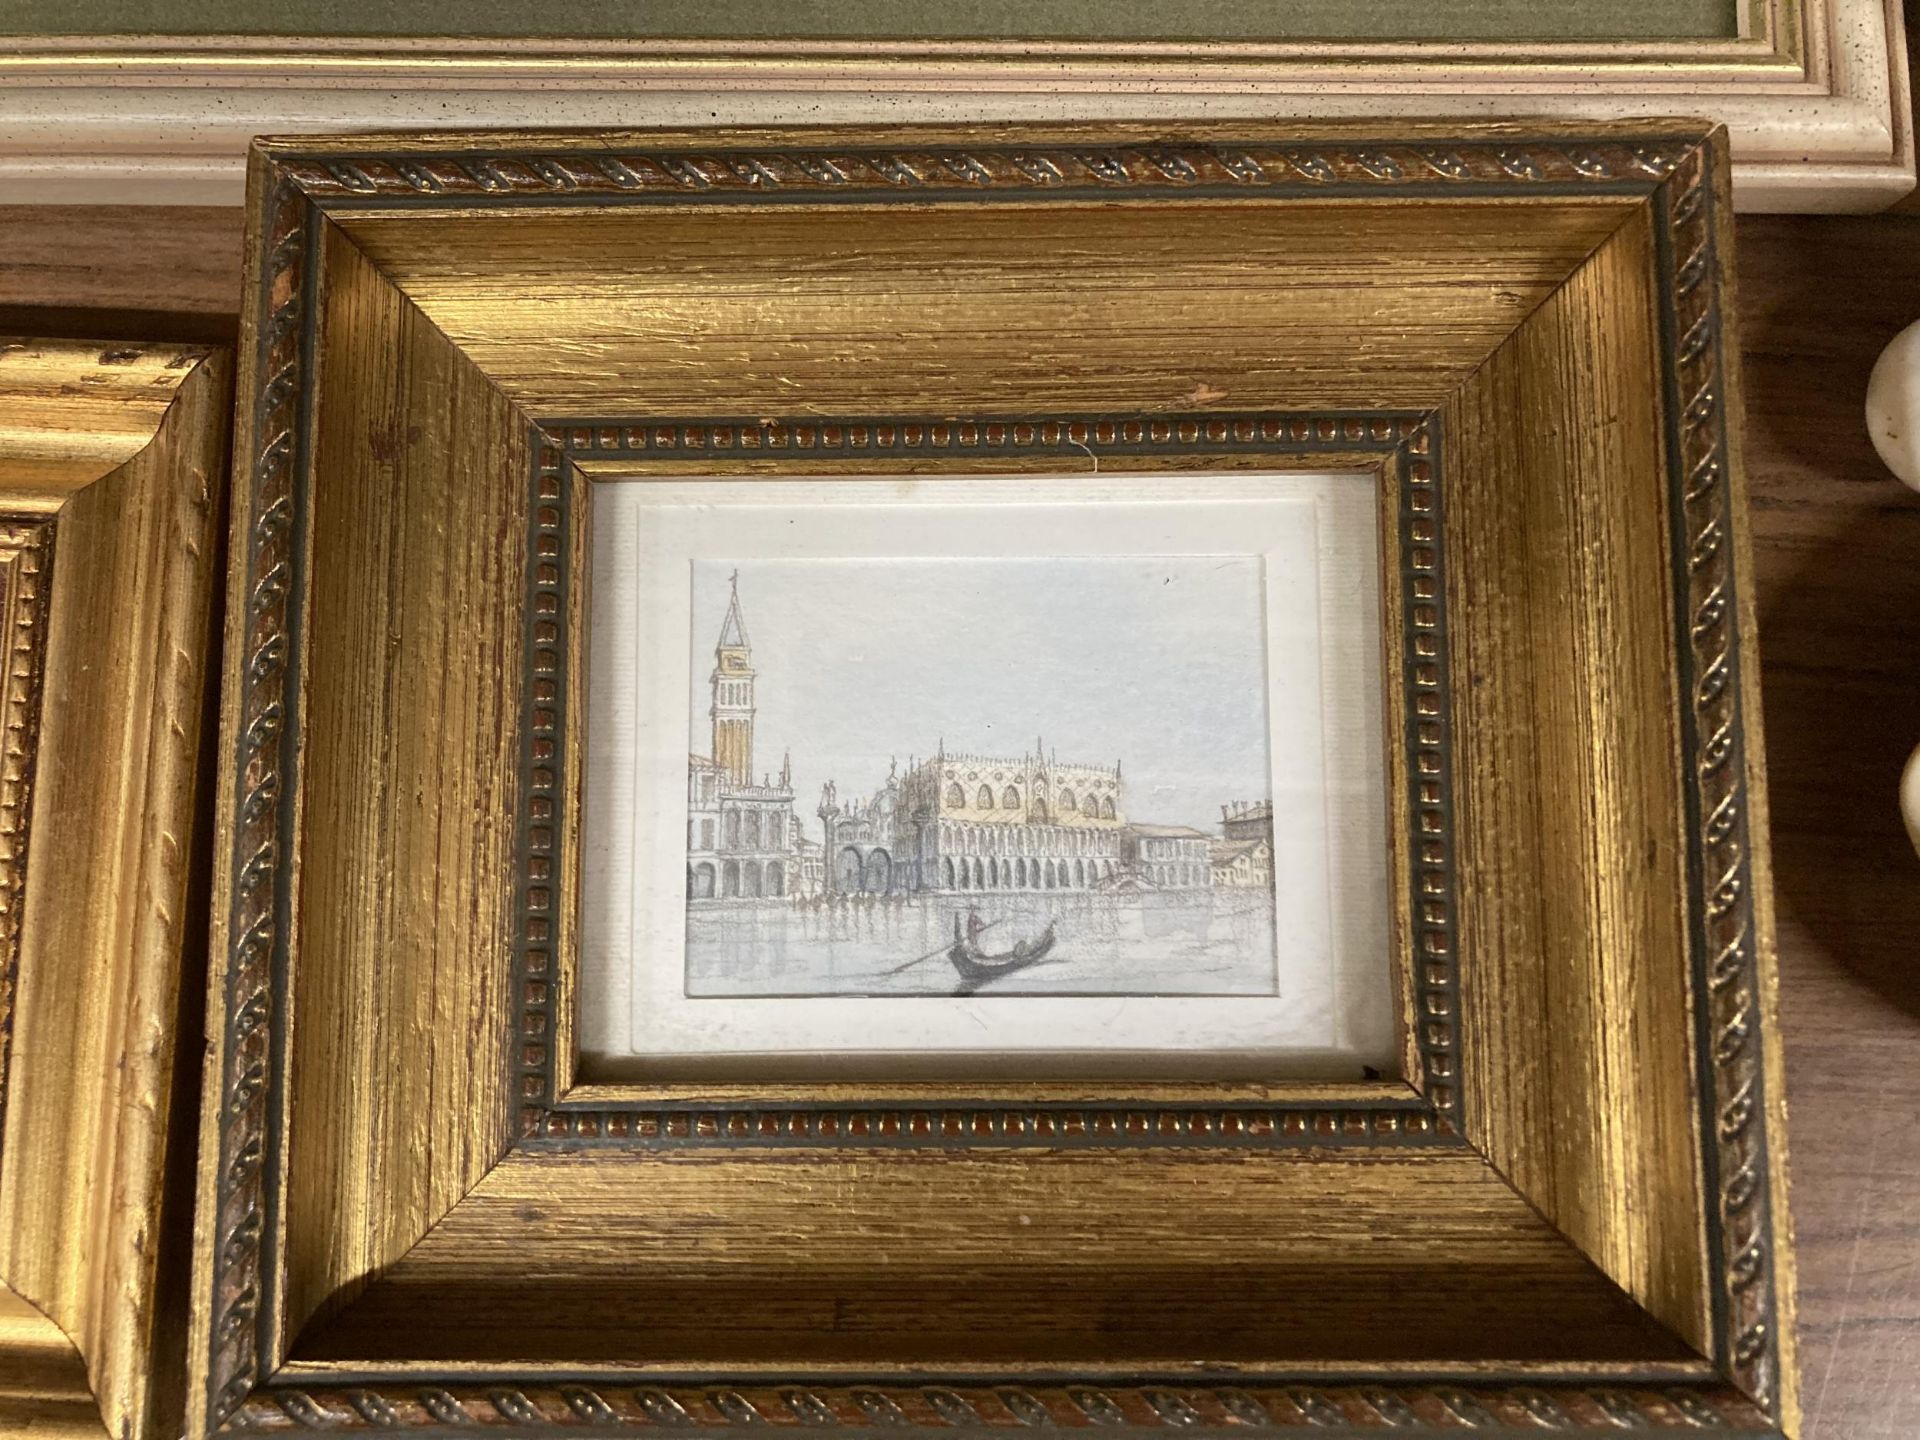 A FRAMED CROSS STITCH TAPESTRY, SMALL GILT FRAMED PRINTS AND A CABINET PLATE - Image 4 of 4